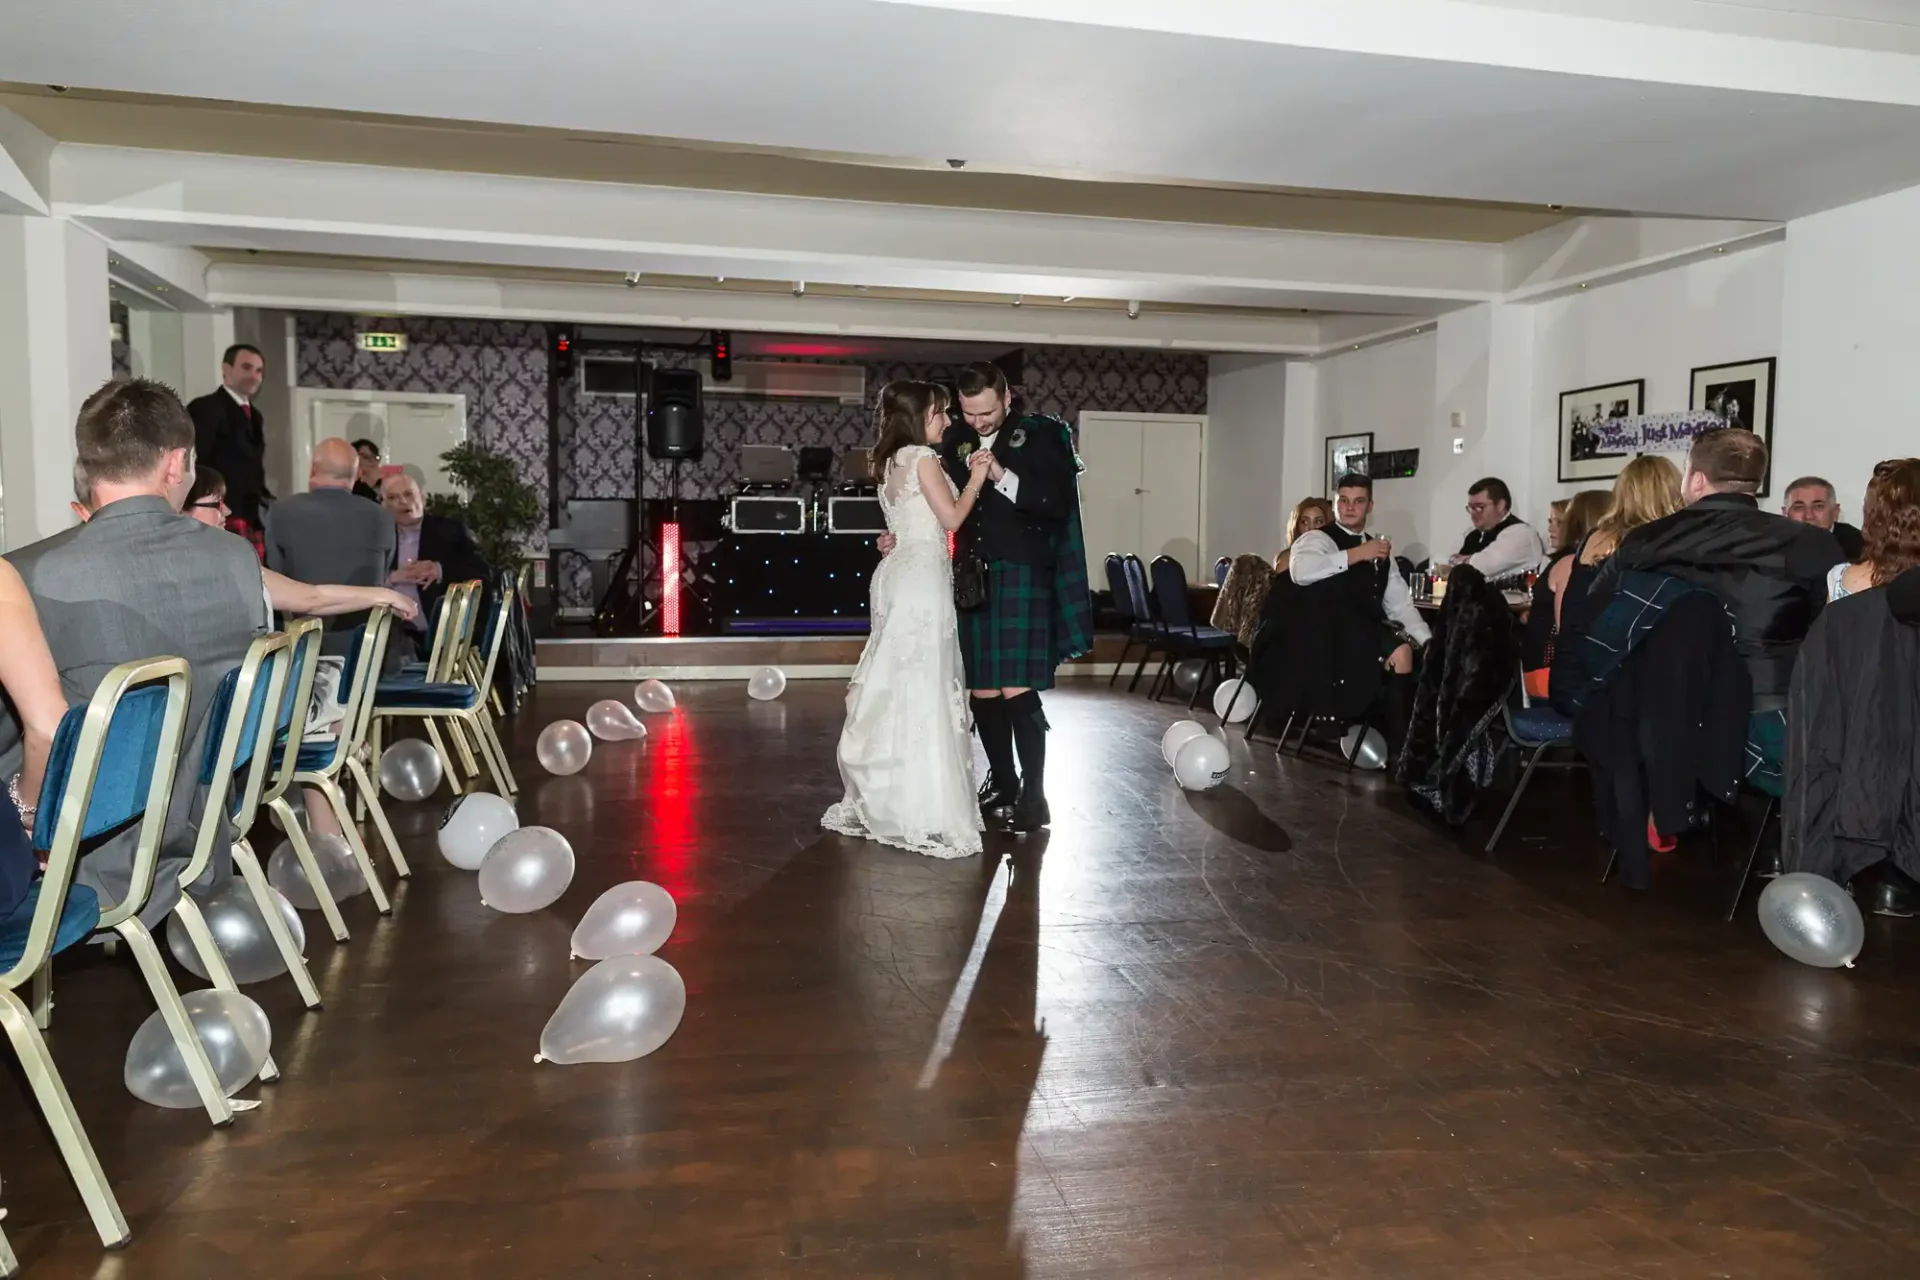 A bride and groom share their first dance in a decorated hall with guests watching and white balloons on the floor.